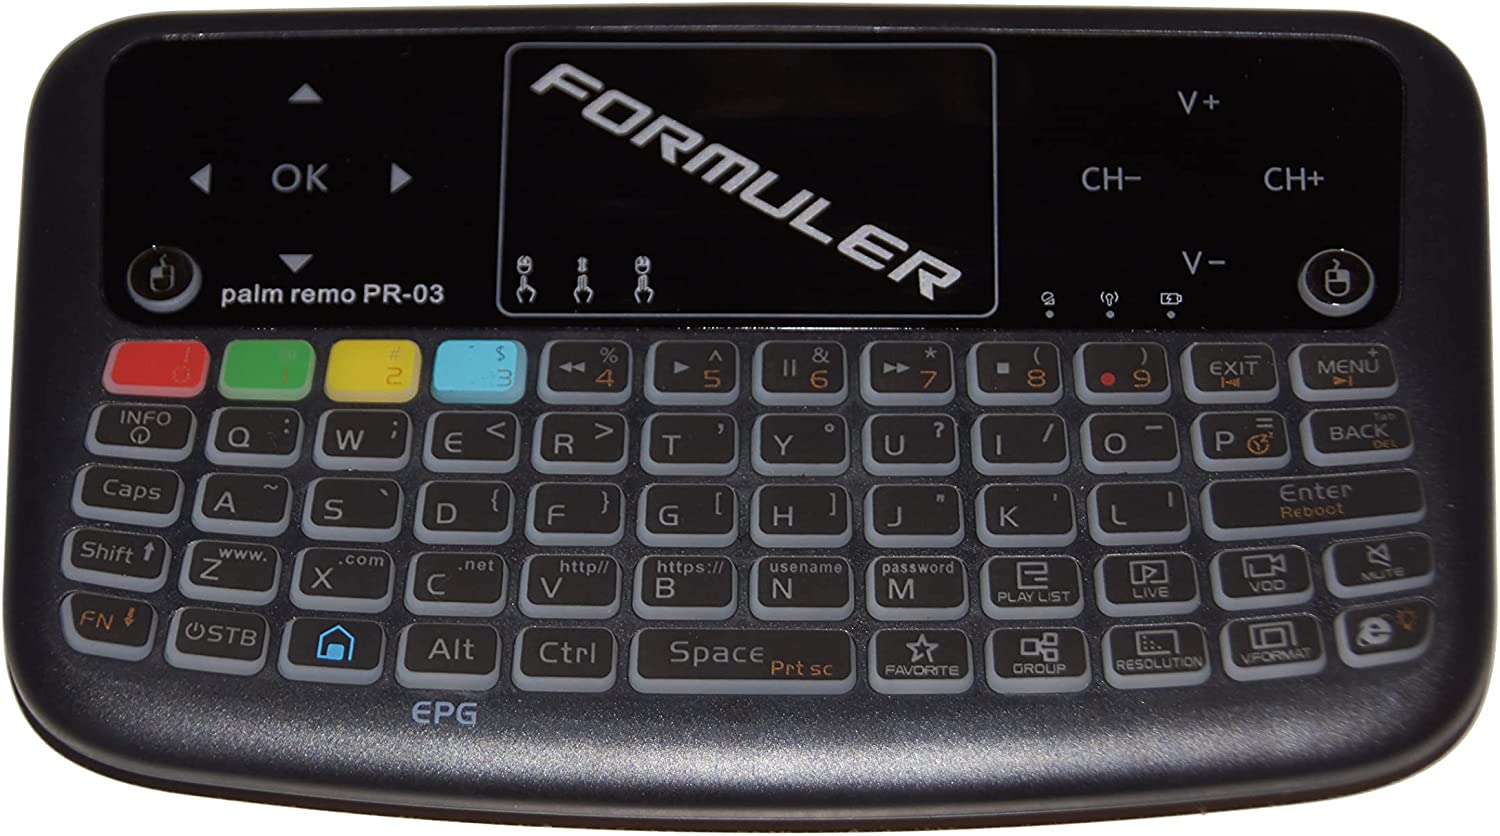 Formuler Z10 + FREE ACCESSORIES: 1 x Wireless Mini keyboard with touchpad + 1 x Retractable USB cable + 1 x Orange Remote cover